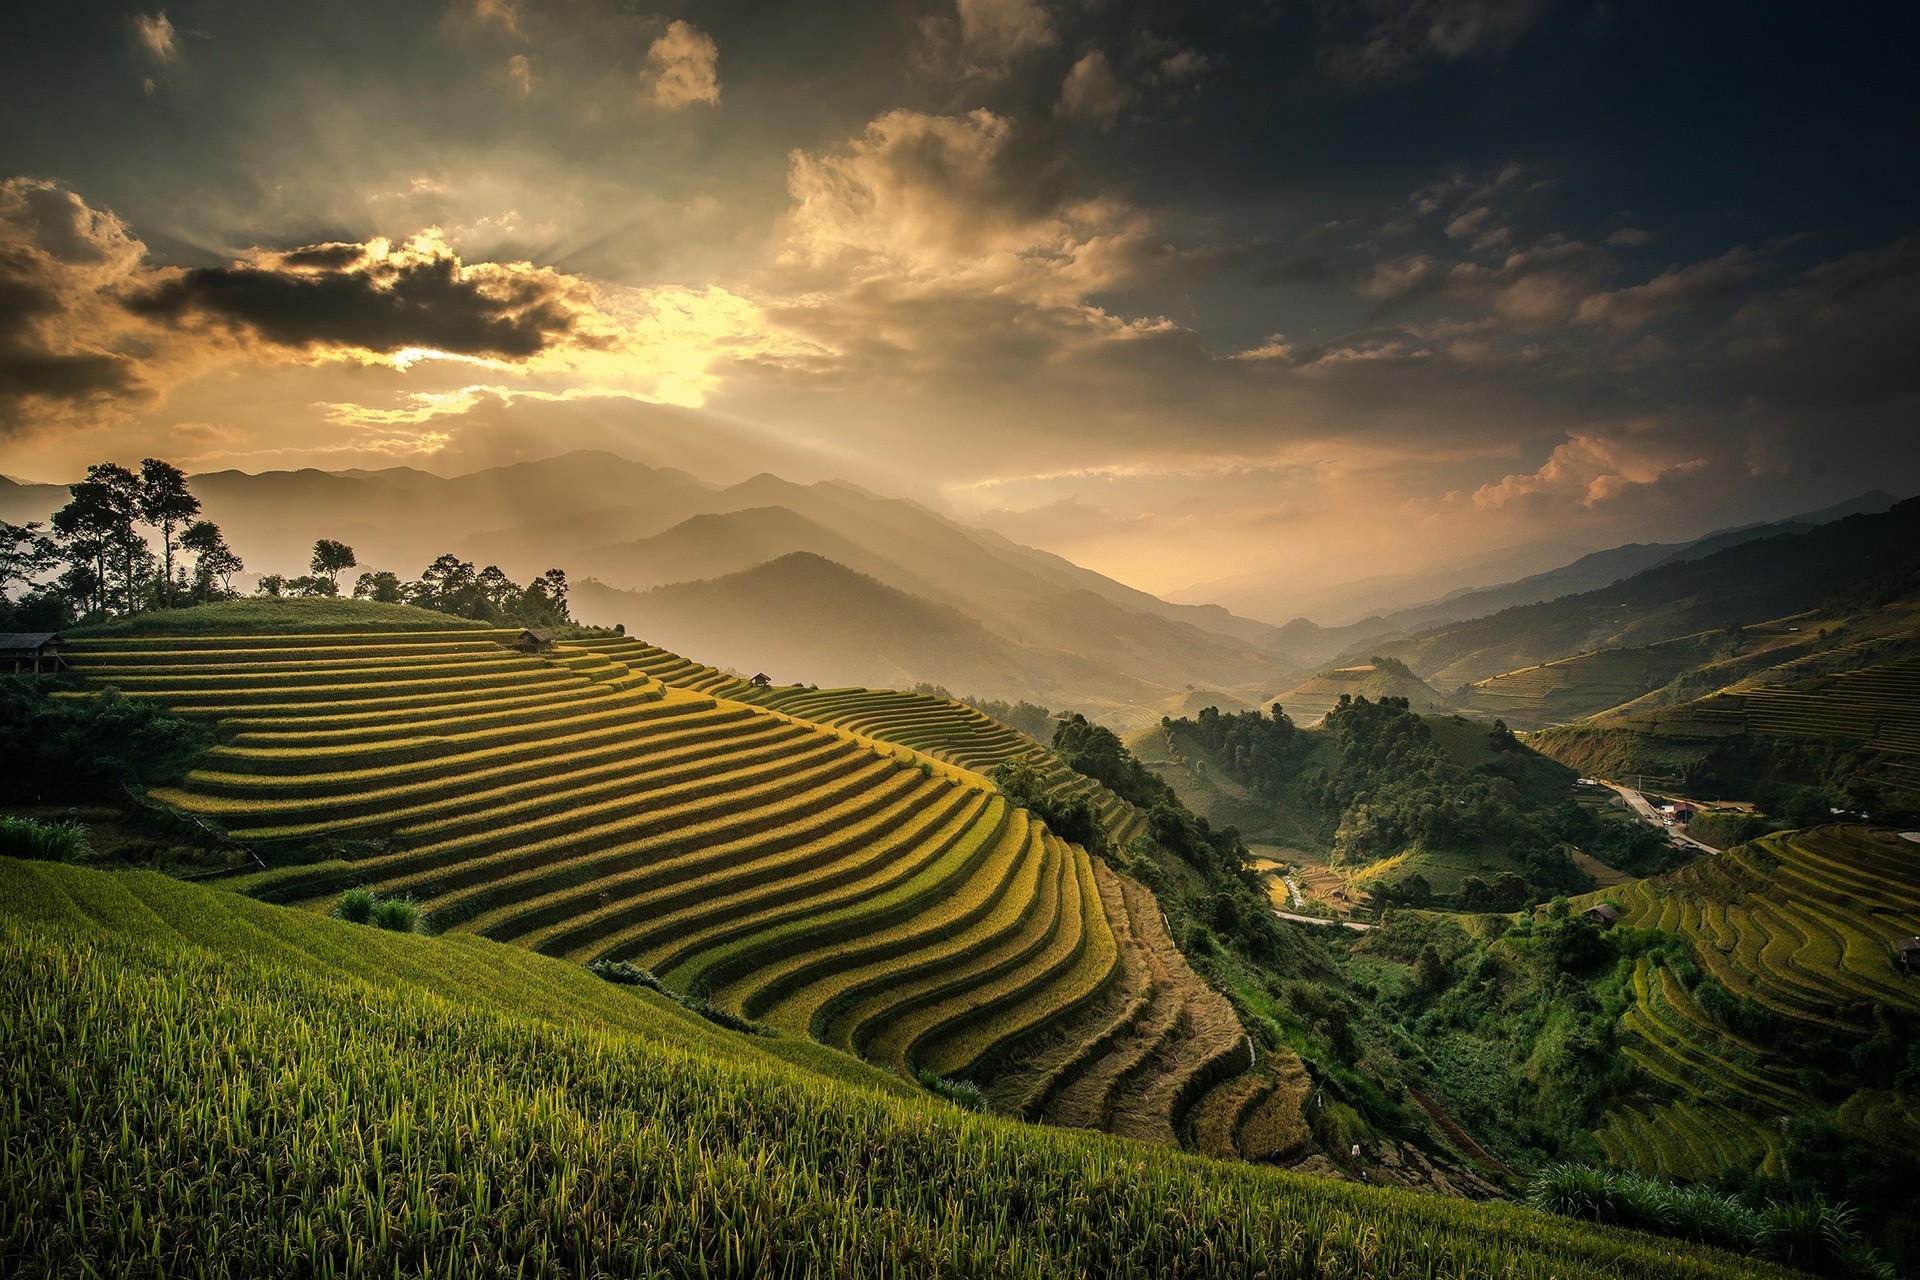 Nature Landscape Field Terraces Mountains Mist Sunset Valley Clouds Sky Bali Indonesia Rice Paddy 1920x1280